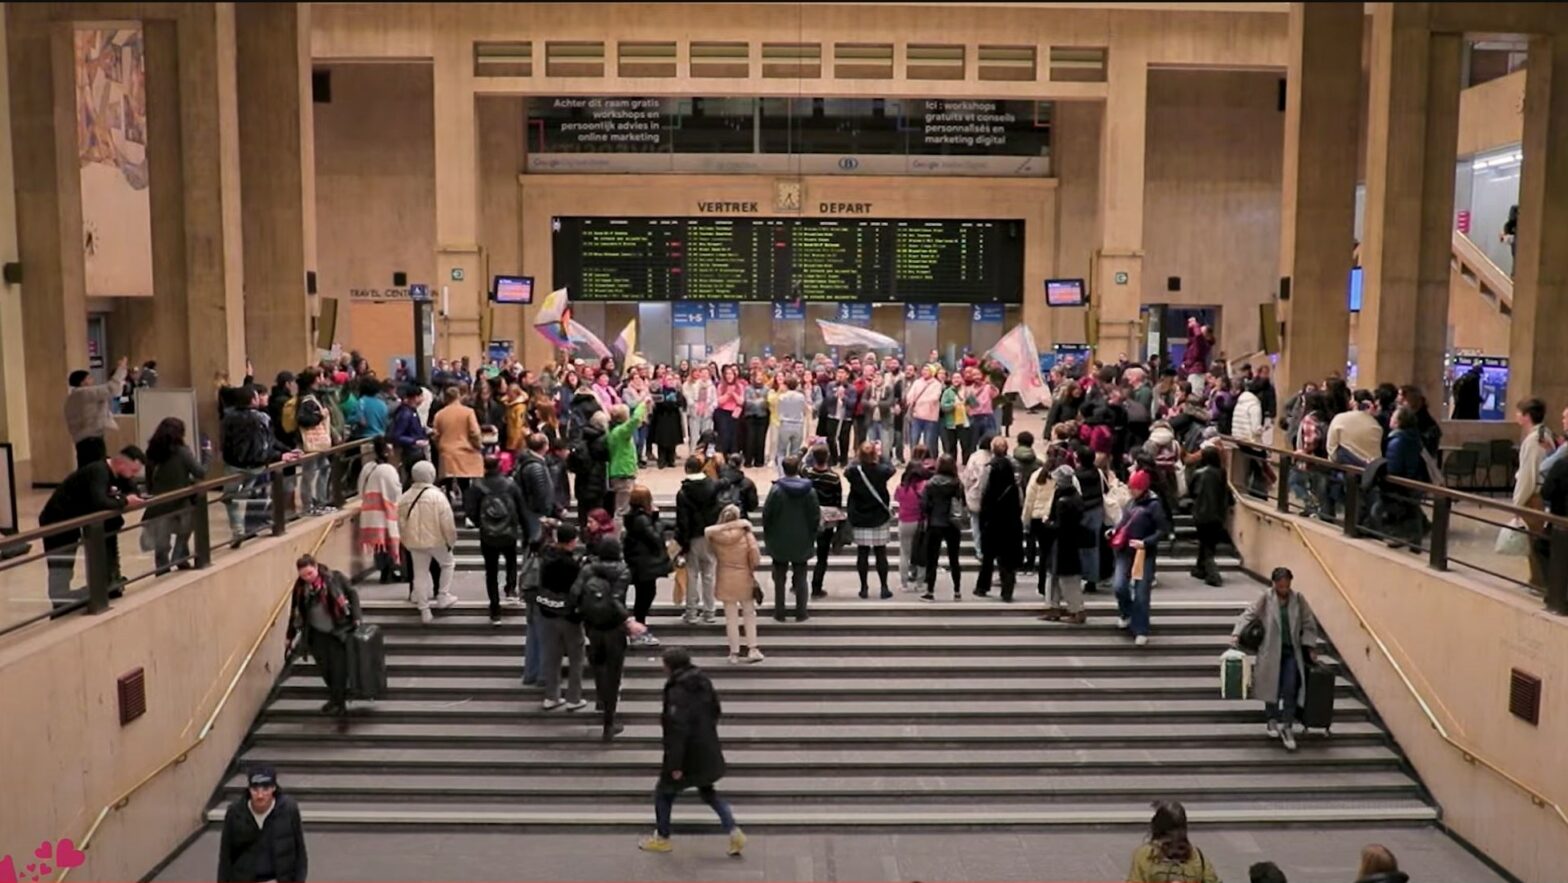 I Am Her: A Flashmob in Support of the Trans Community